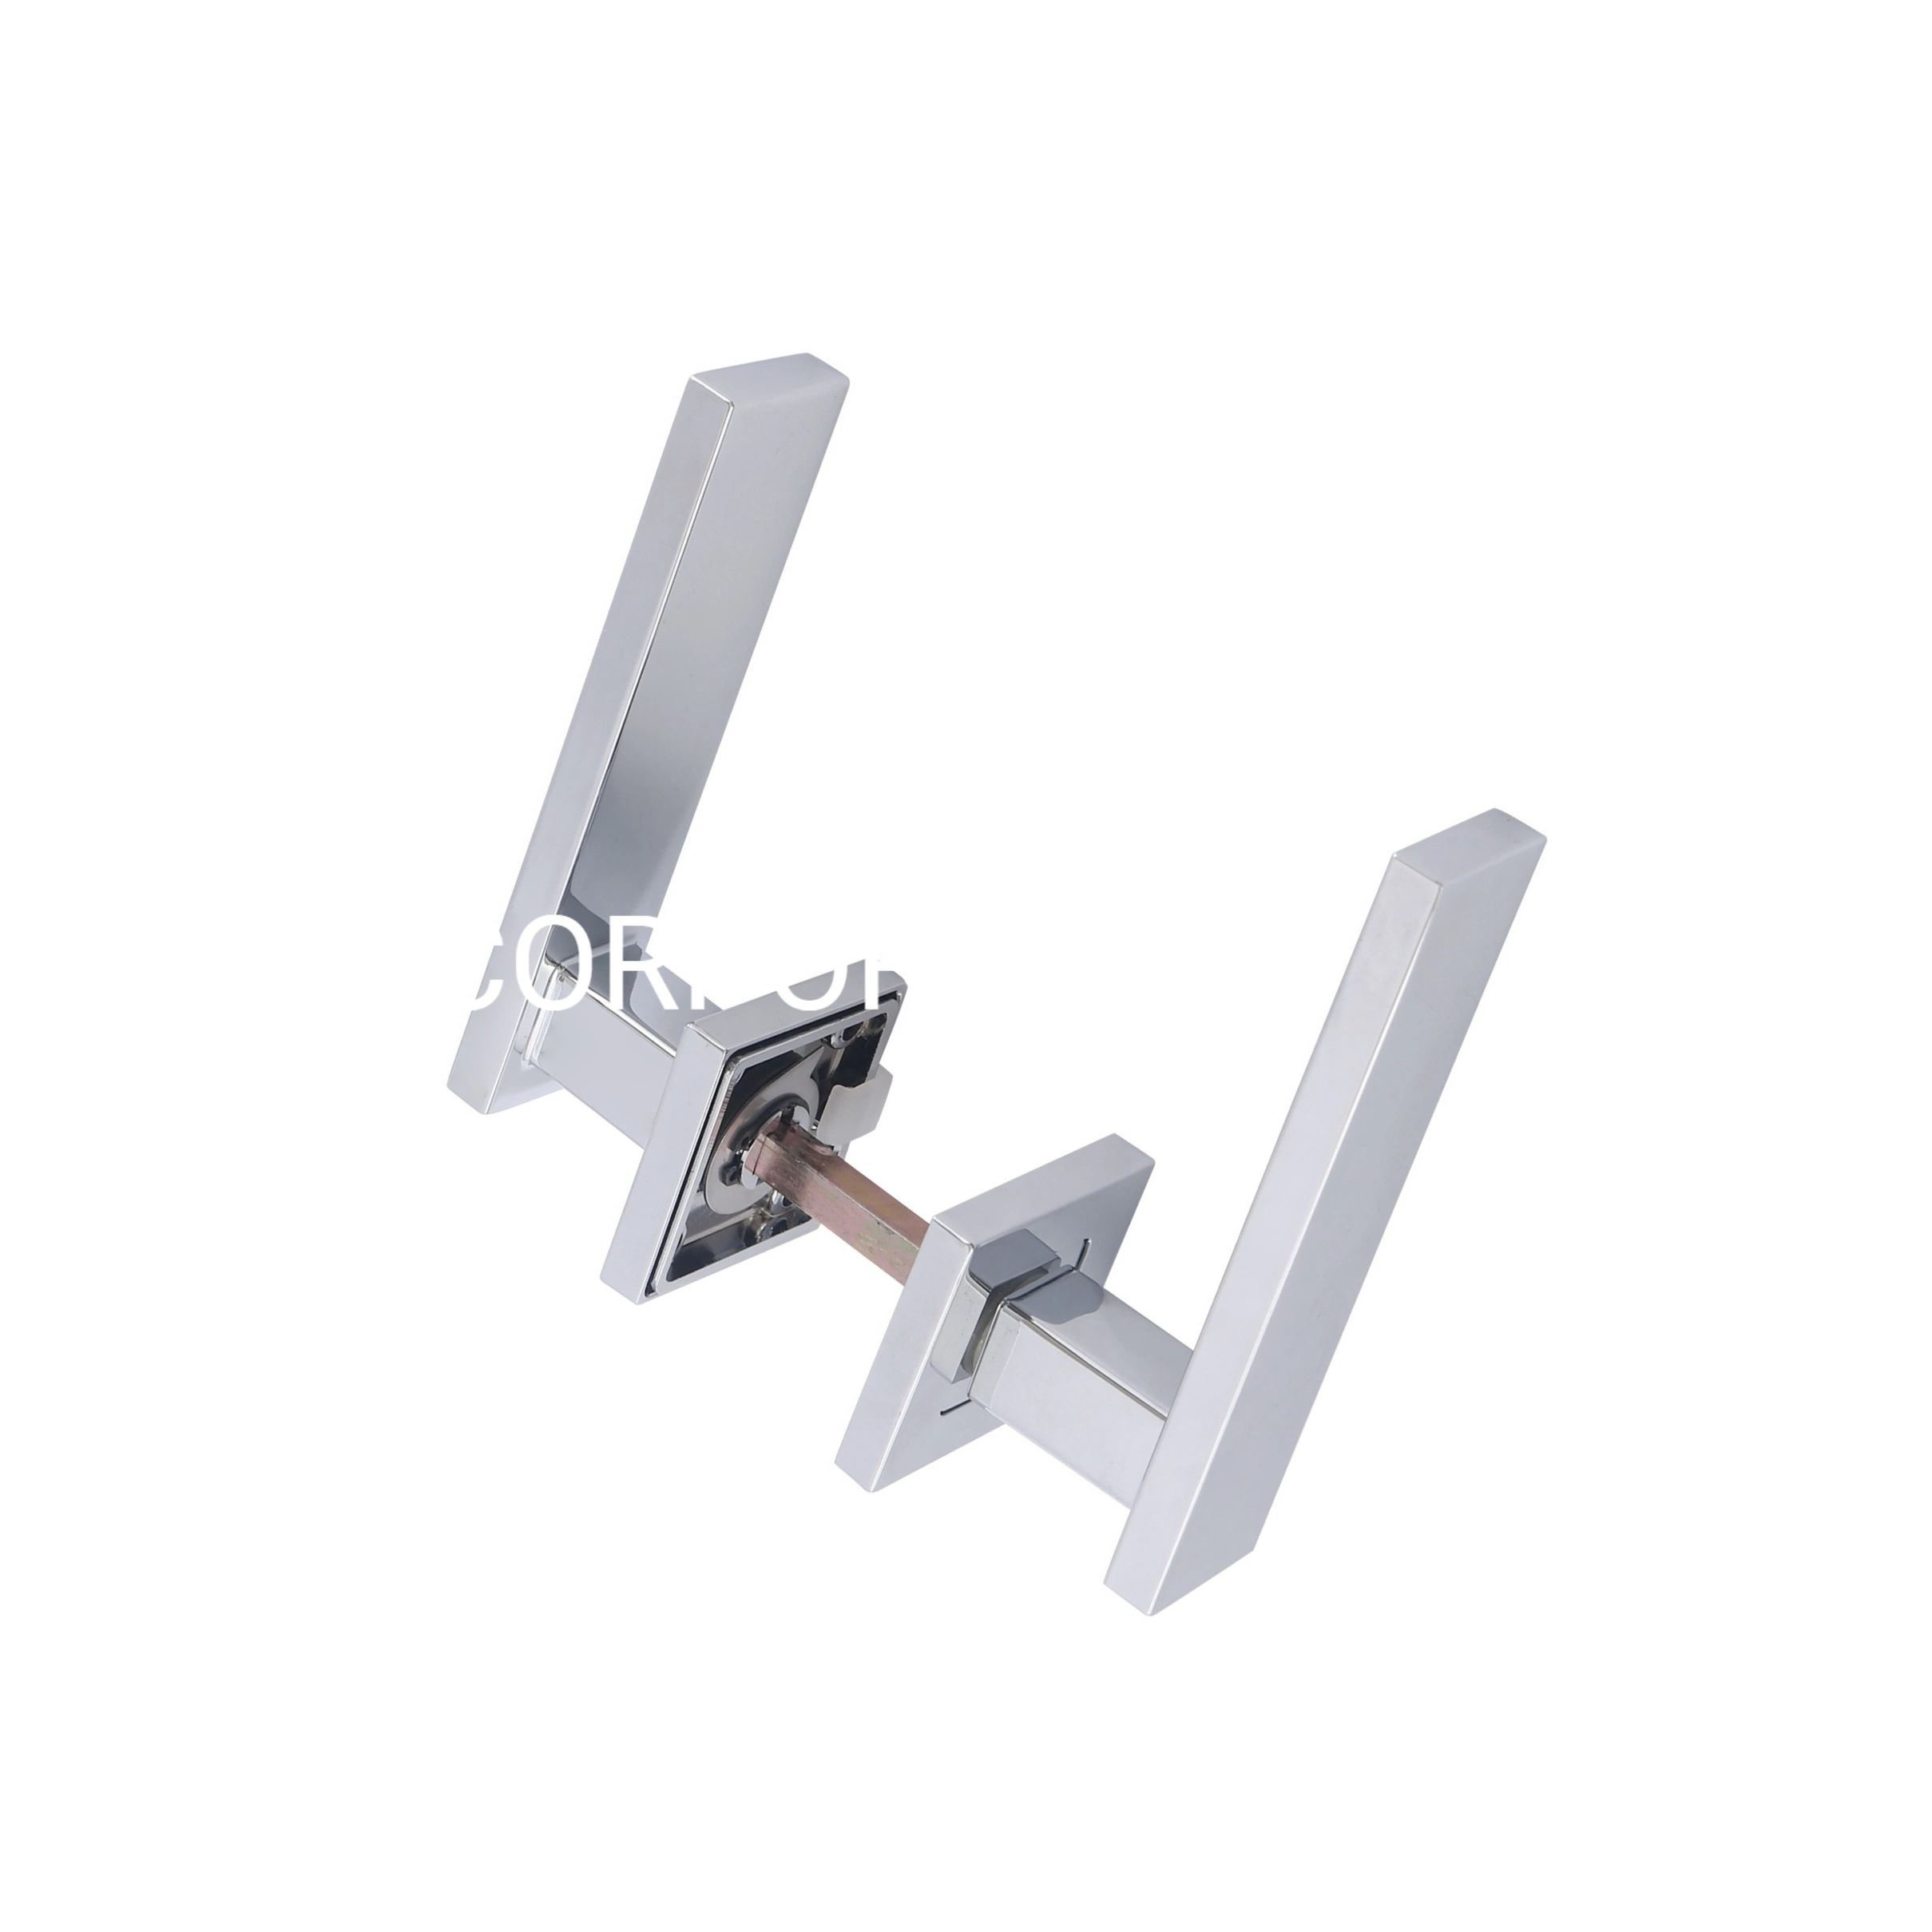 Casting Stainless Steel 135mm Furniture Pull Handle Furniture Lever Handle Cabinet Handle